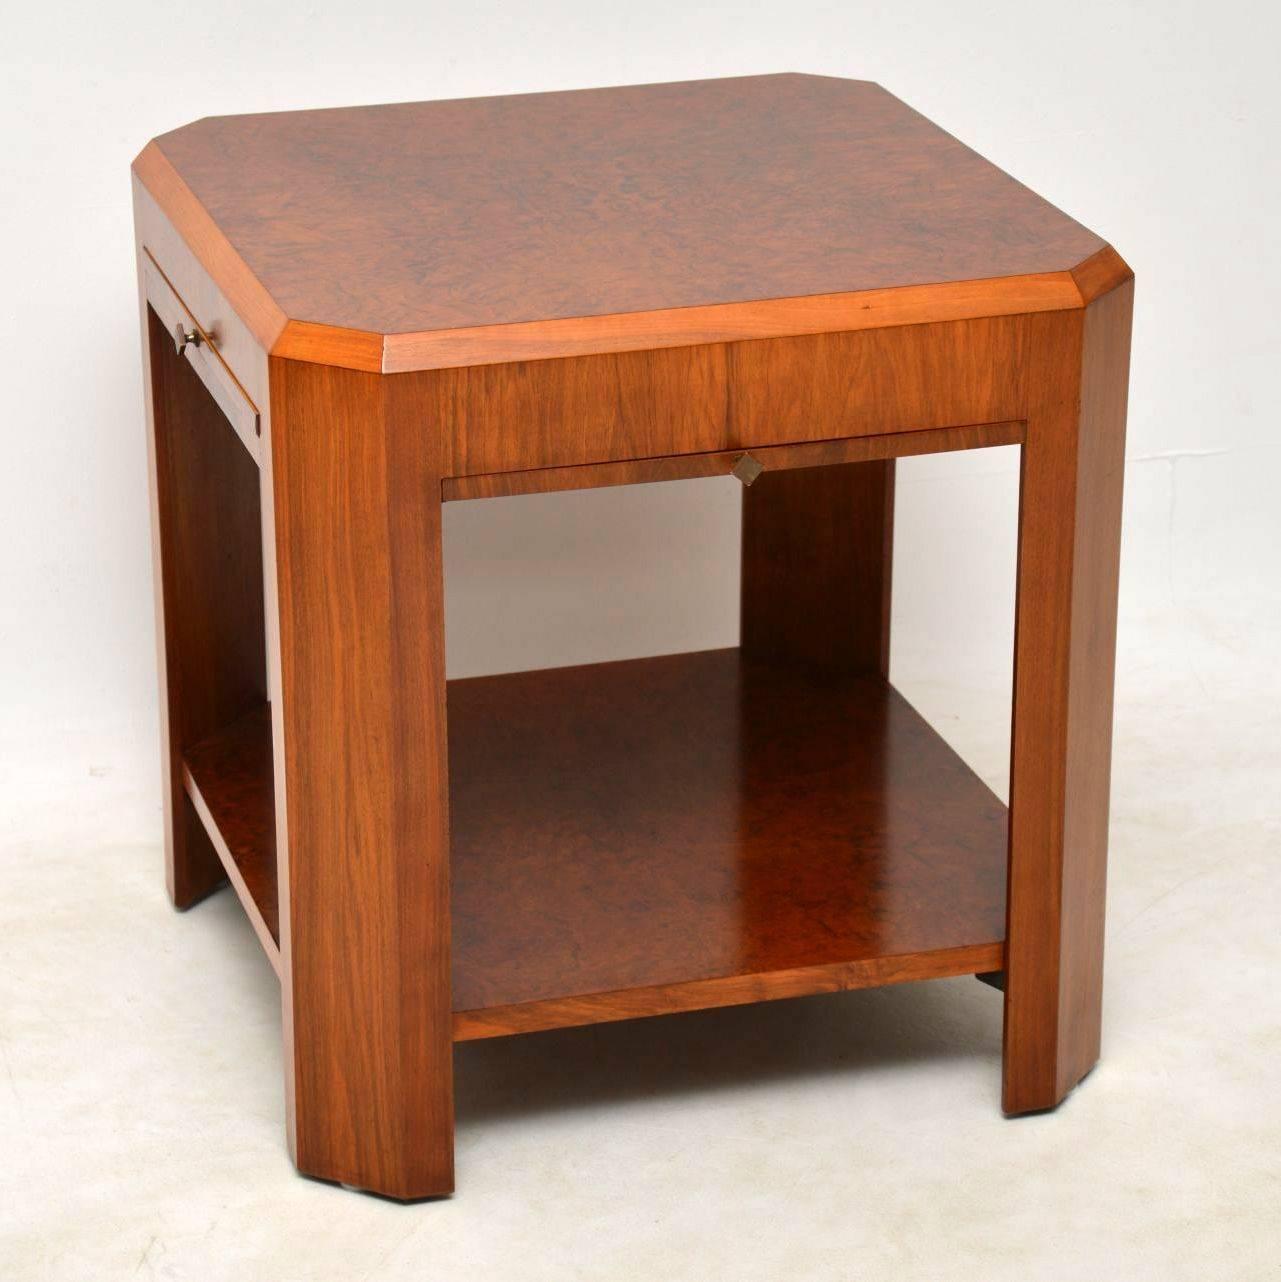 French 1920s Art Deco Vintage Walnut Coffee Table or Side Table